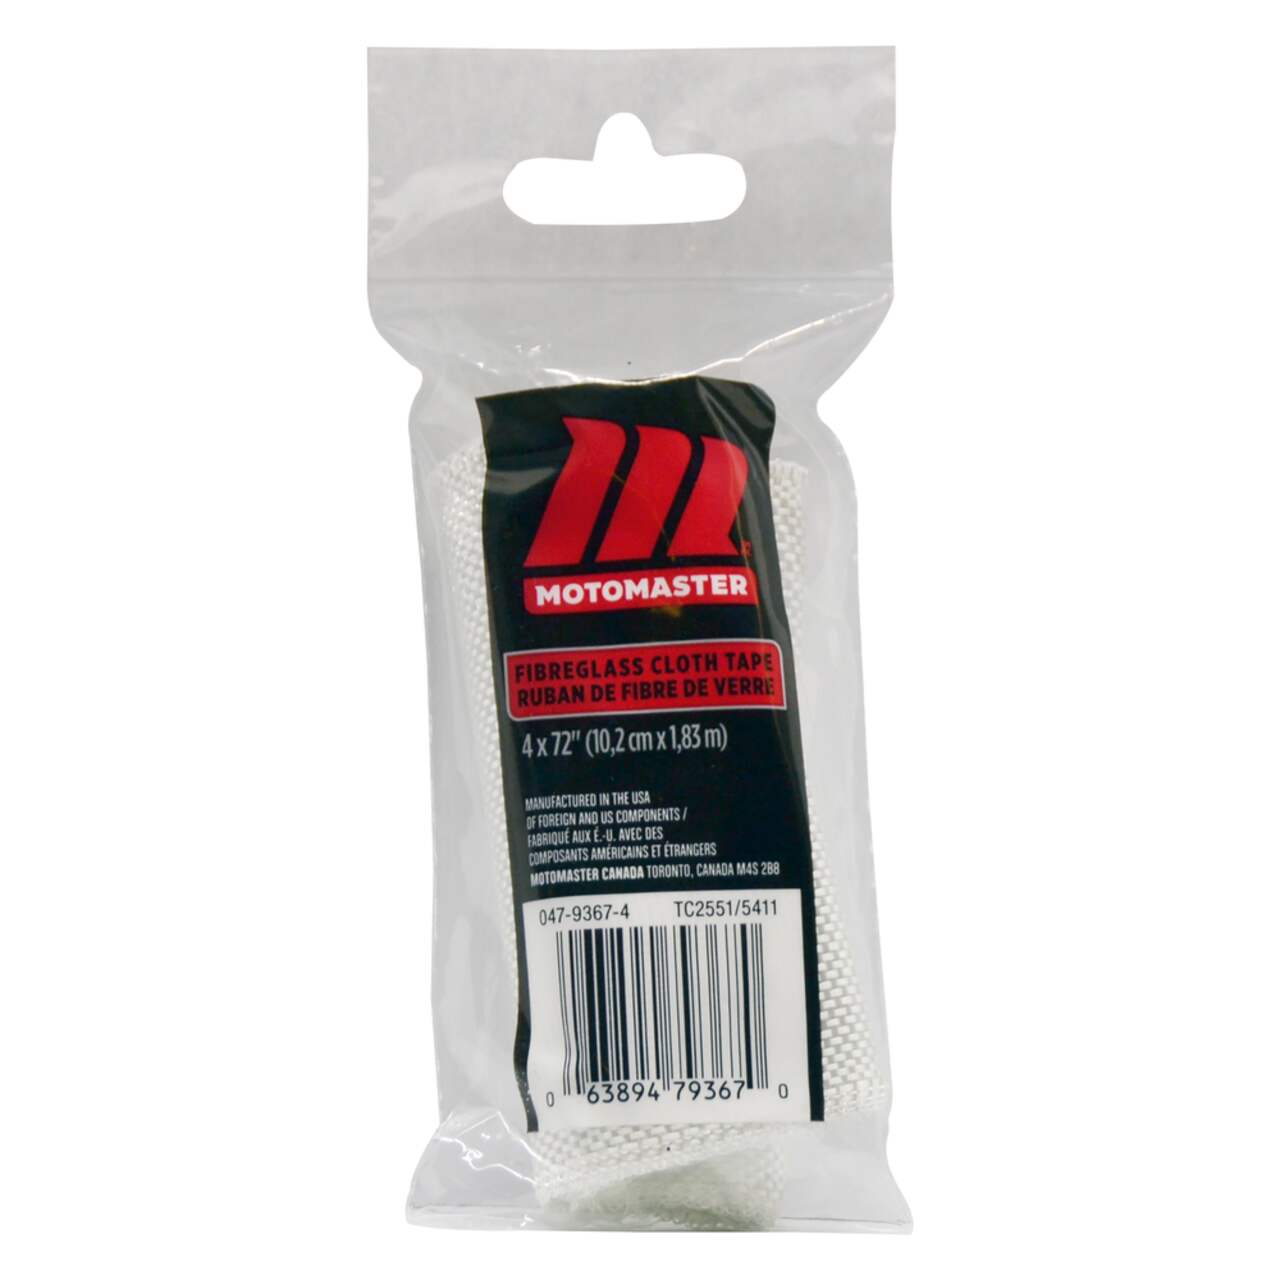 https://media-www.canadiantire.ca/product/automotive/car-care-accessories/auto-body-repair/0479367/mm-fiberglass-cloth-tape-46e0b874-189e-49f0-b04c-c49ba7b5f16b.png?imdensity=1&imwidth=640&impolicy=mZoom